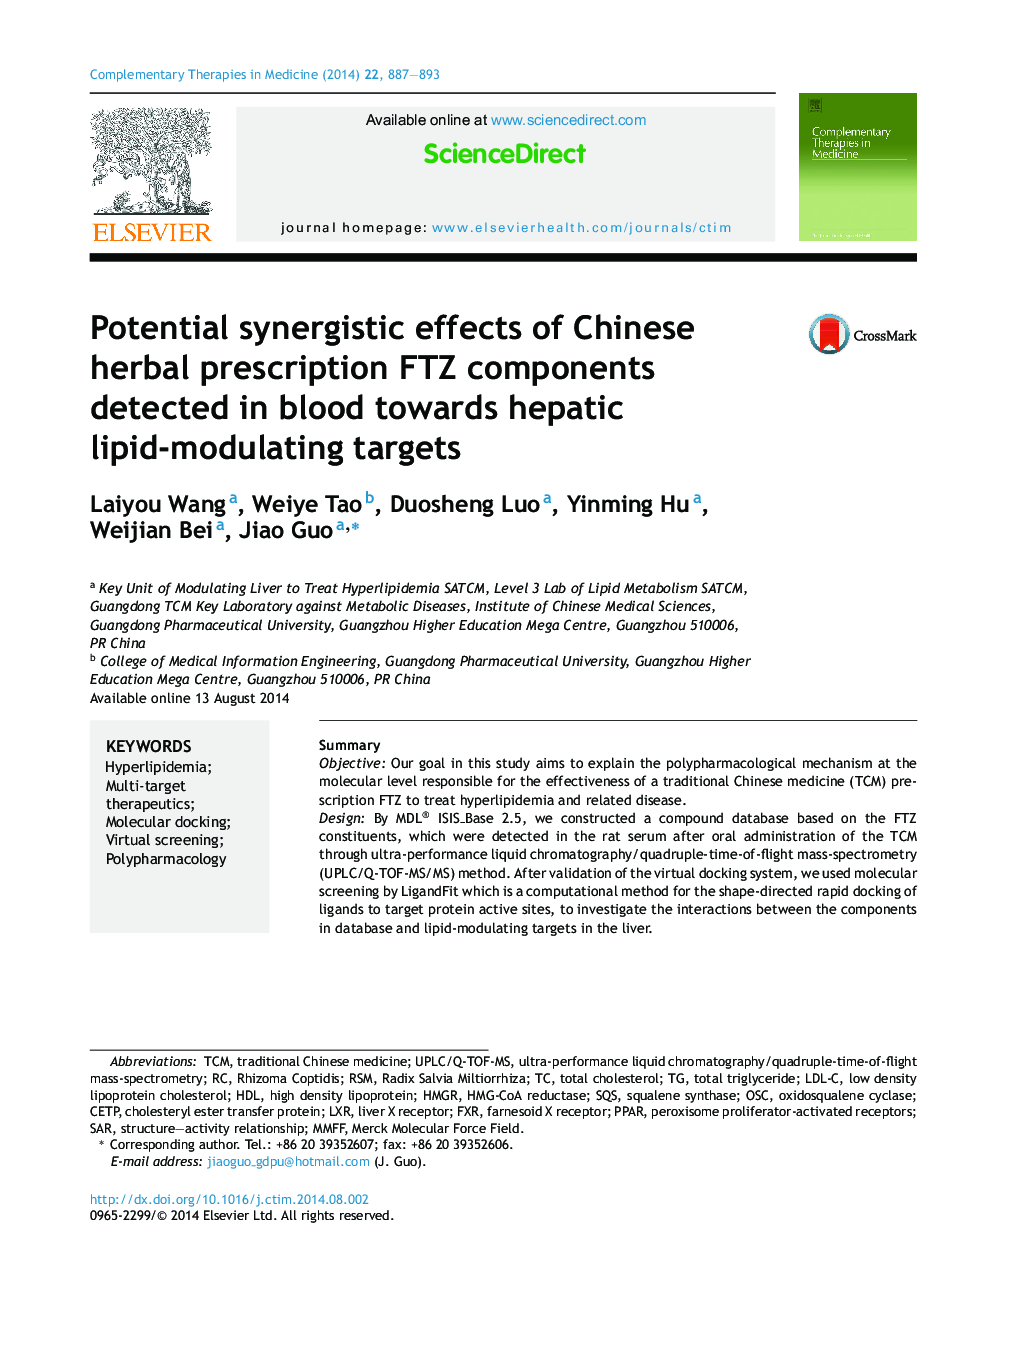 Potential synergistic effects of Chinese herbal prescription FTZ components detected in blood towards hepatic lipid-modulating targets